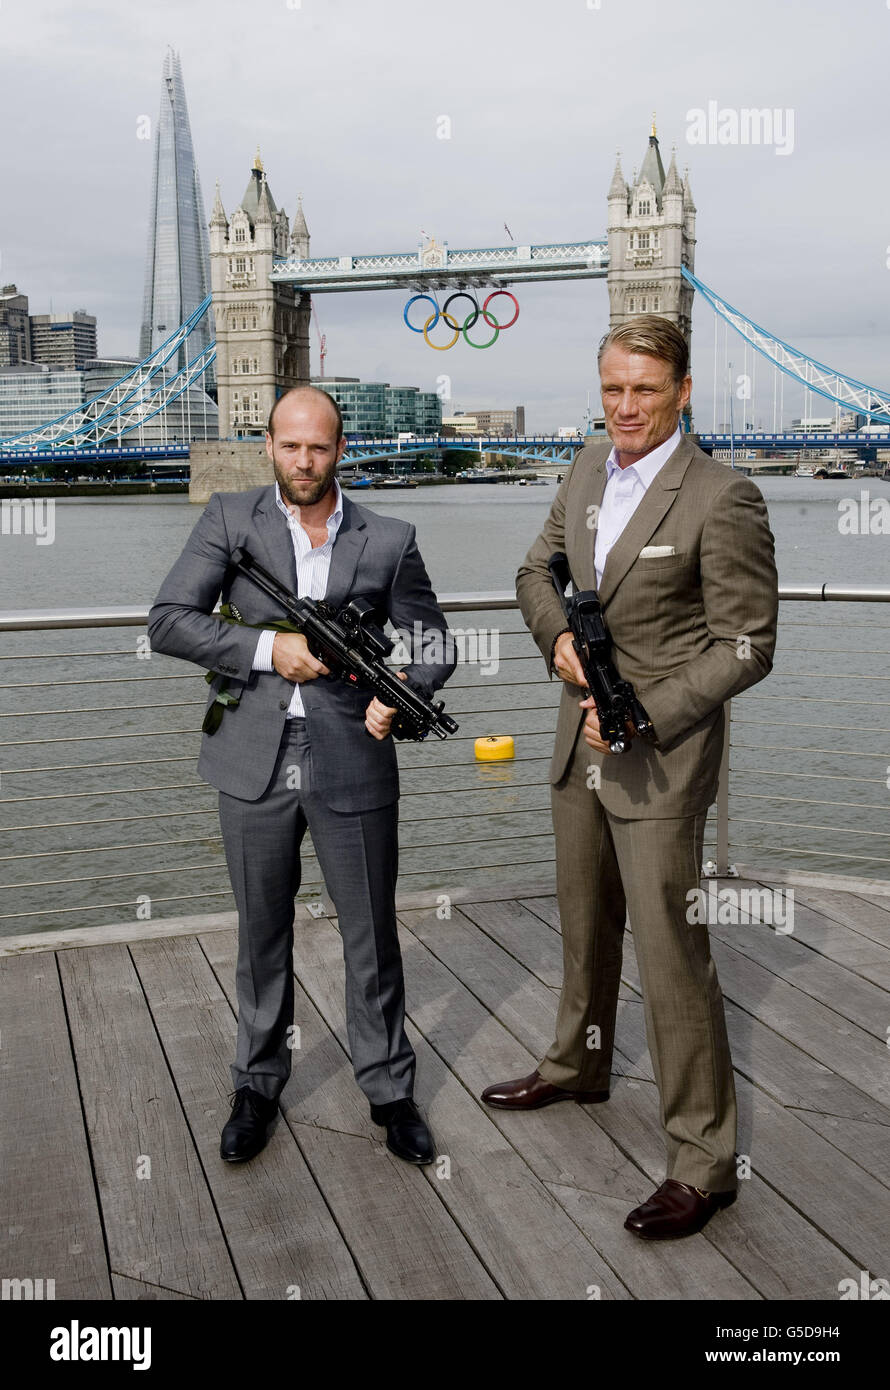 Jason Statham (left) and Dolph Lundgren visit members of the Royal Navy at HMS President Royal Navy Reserve headquarters in London. Stock Photo